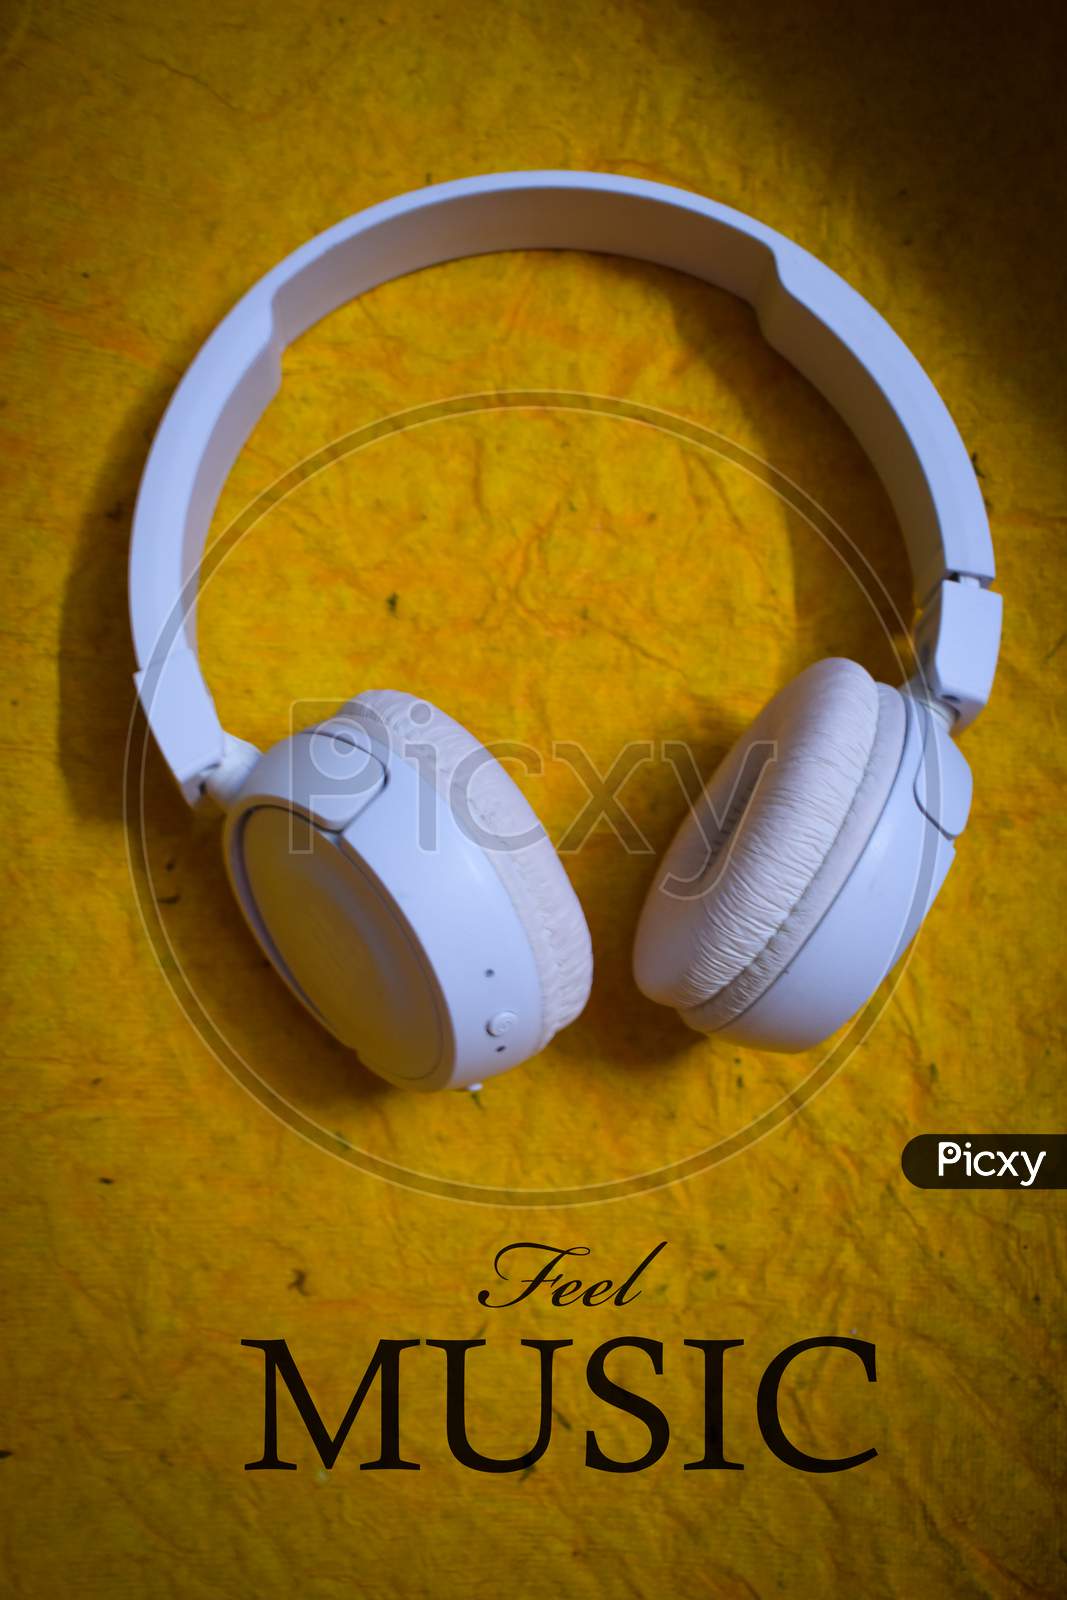 white Bluetooth headphone on a yellow background